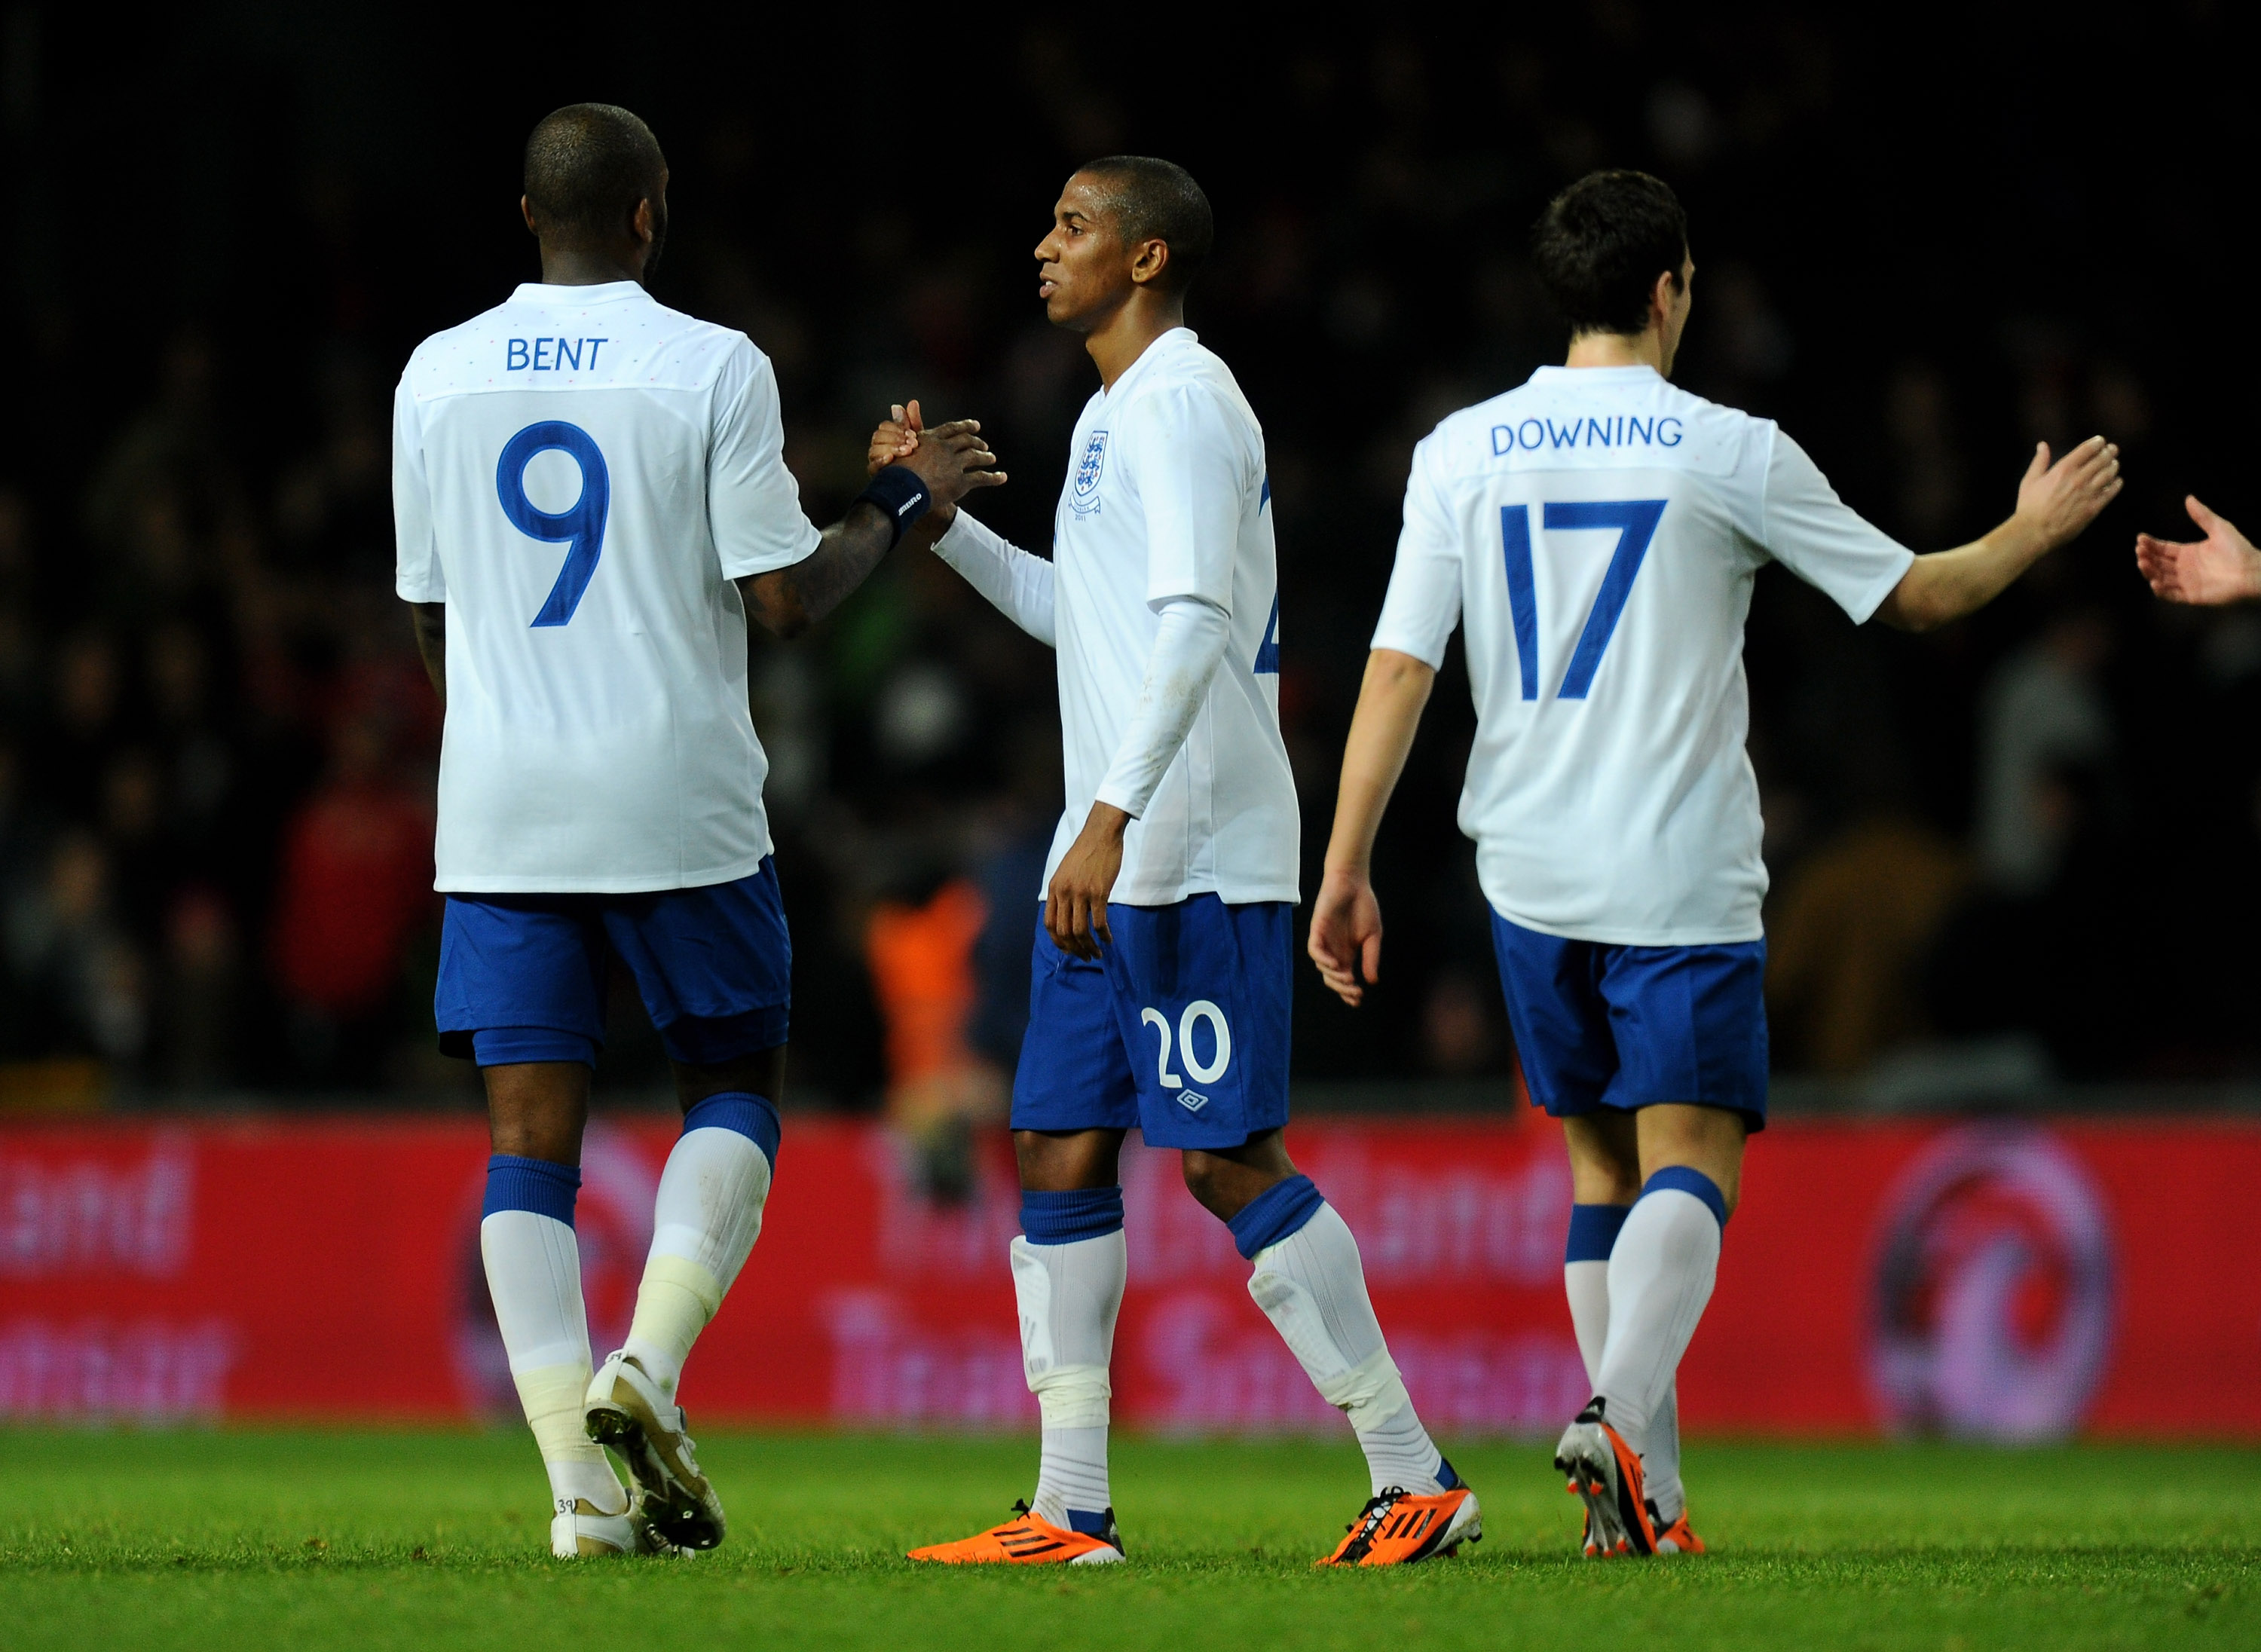 COPENHAGEN, DENMARK - FEBRUARY 09:  Ashley Young of England is congratulated by team mate Darren Bent after scoring his team's second goal during the International Friendly match between Denmark and England at Parken Stadium on February 9, 2011 in Copenha